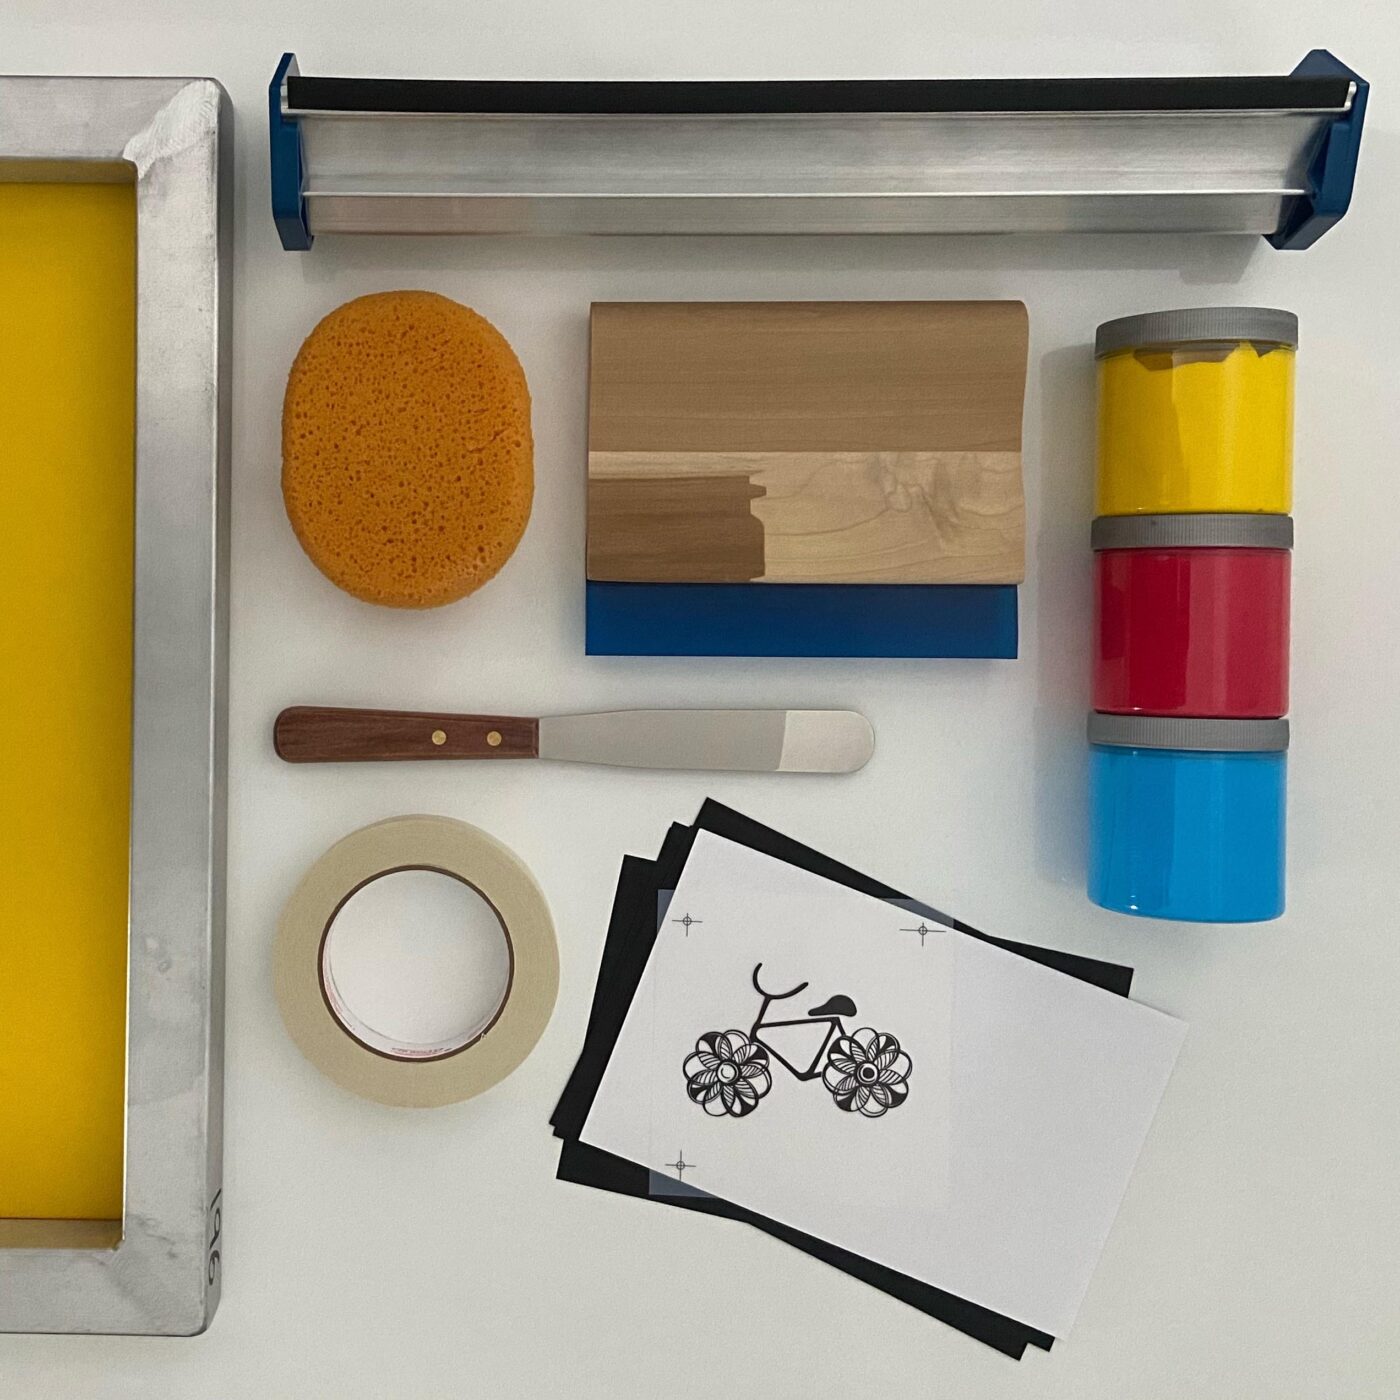 Screen printing supplies on a table